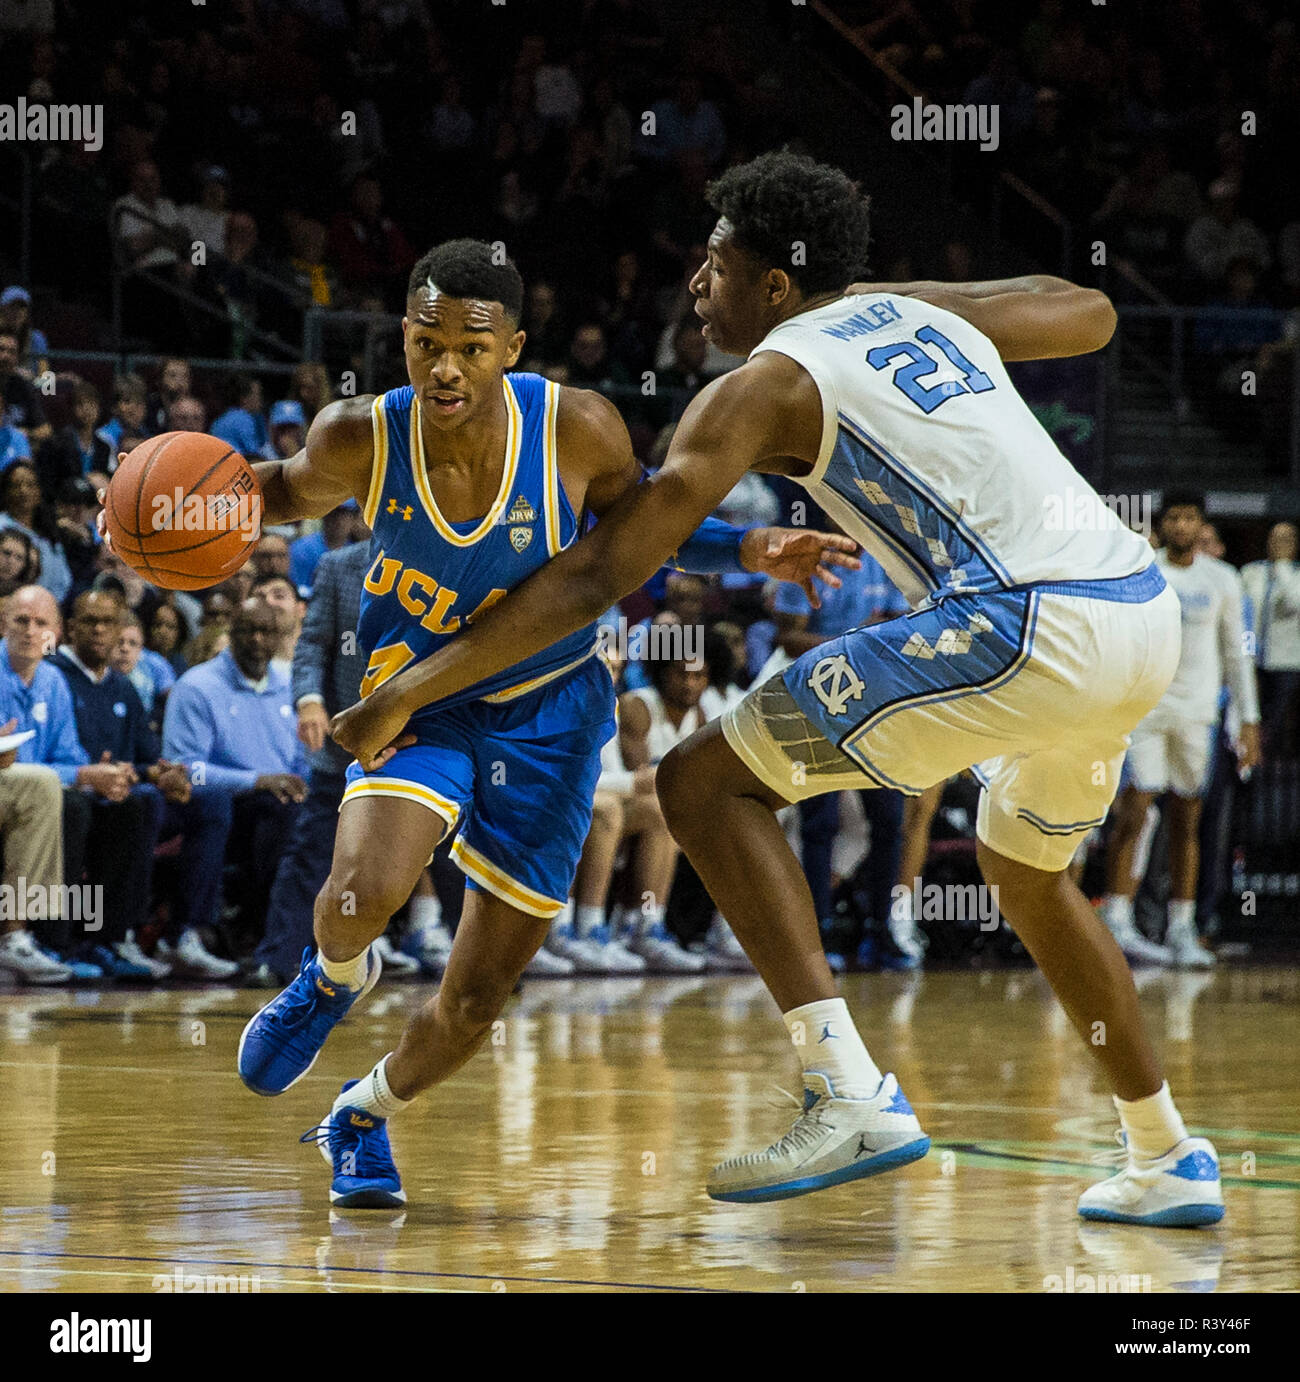 UNC 94, UCLA 78: Tar Heels come from behind with another strong